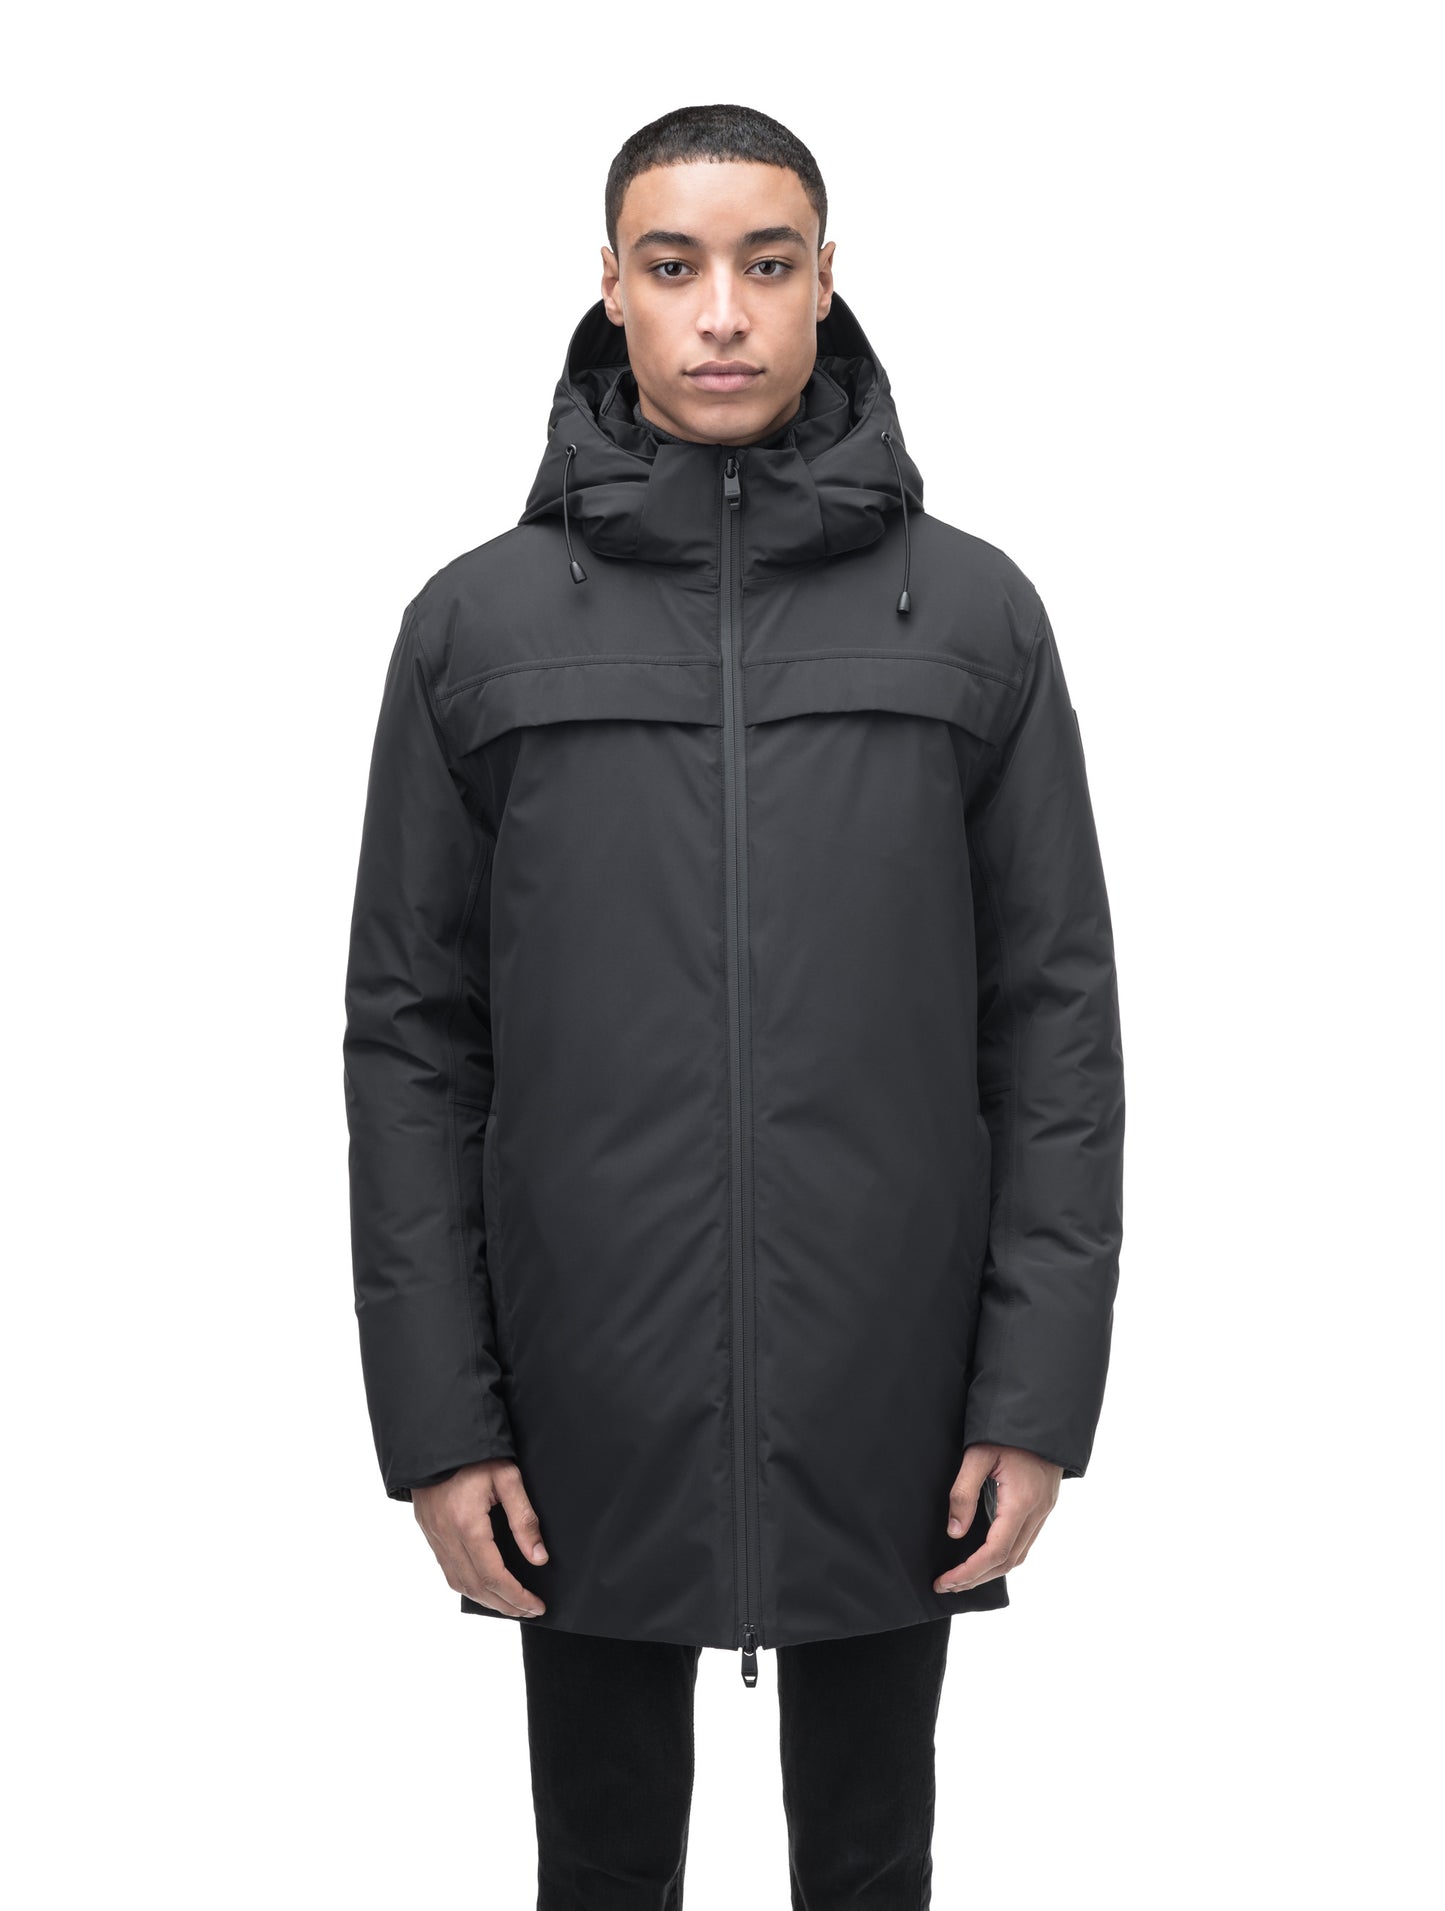 Atlas Men's Performance Parka in thigh length, Canadian duck down insulation, removable hood, and two-way zipper, in Black